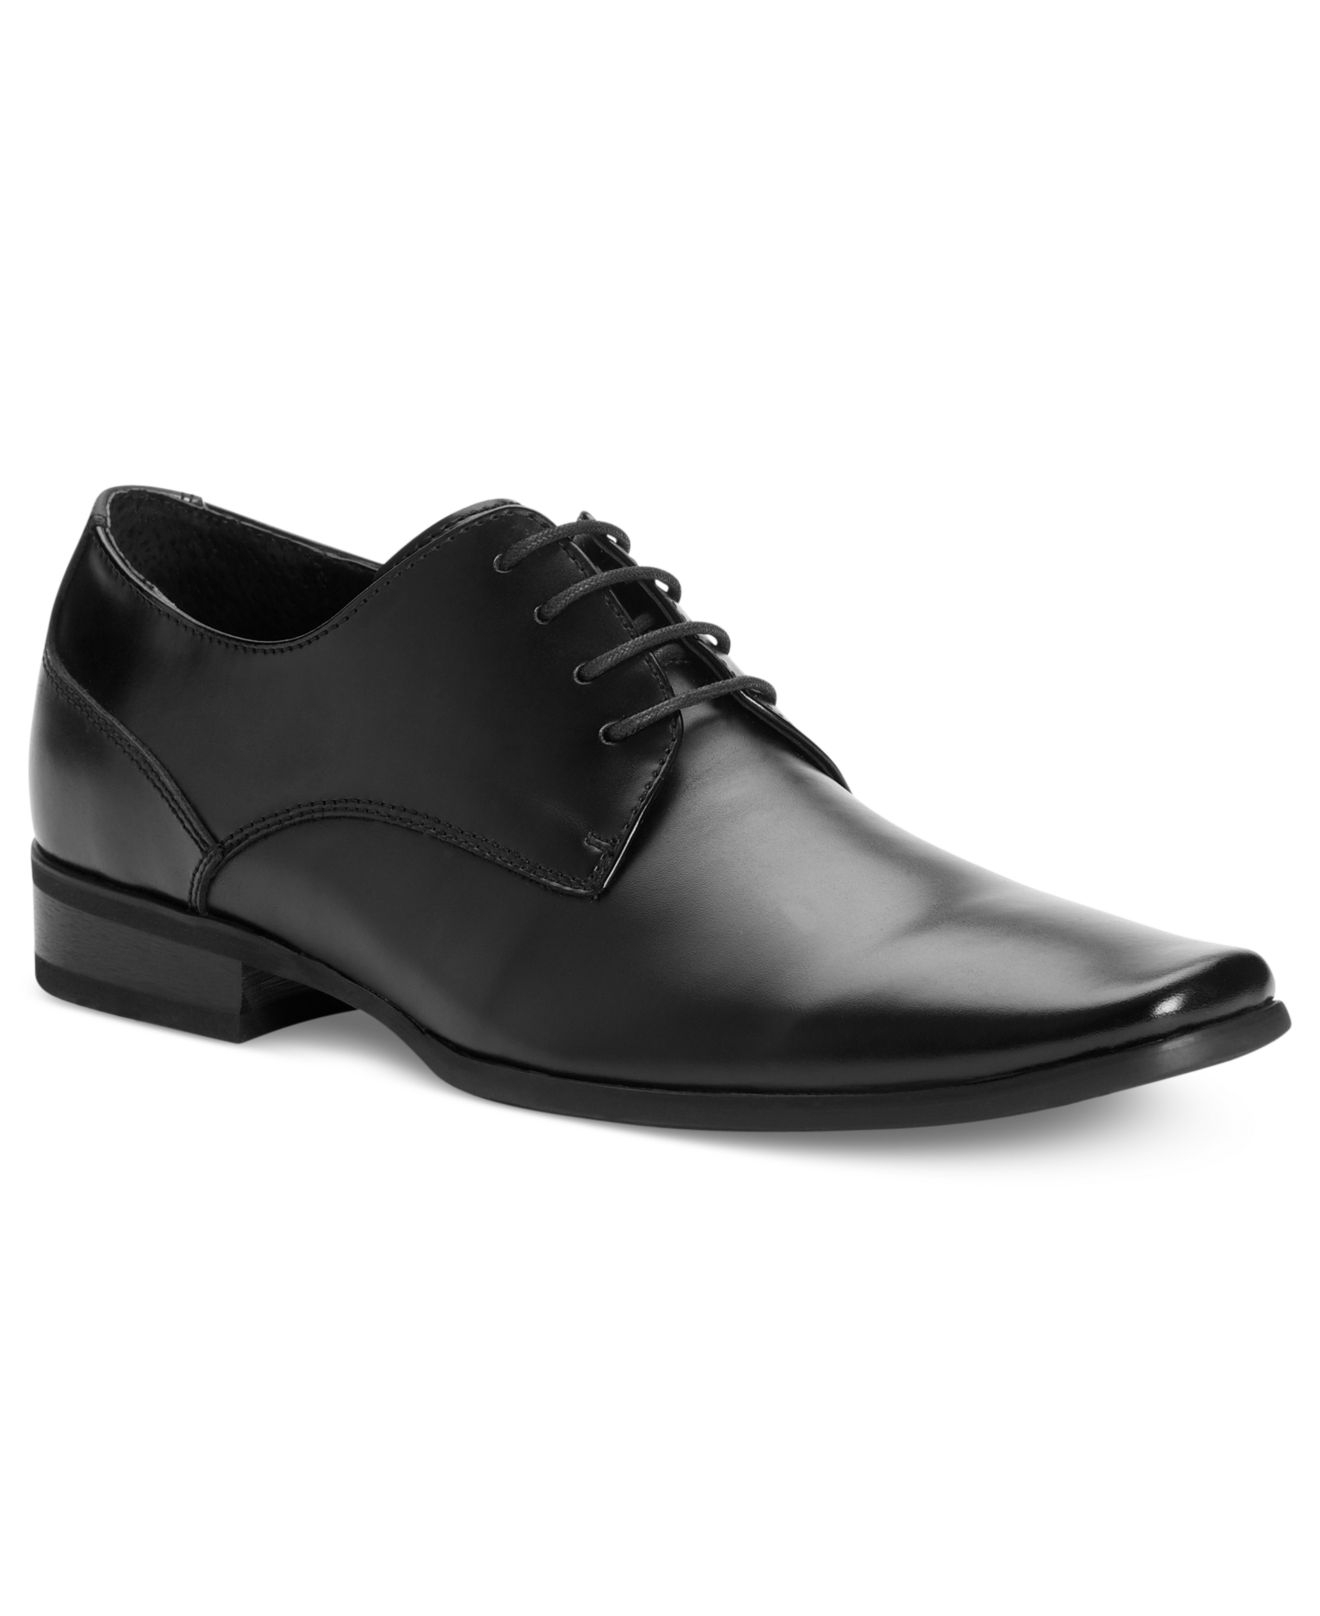 Calvin klein Brodie Leather Oxfords- Extended Widths Available in Black for Men - Save 12% | Lyst